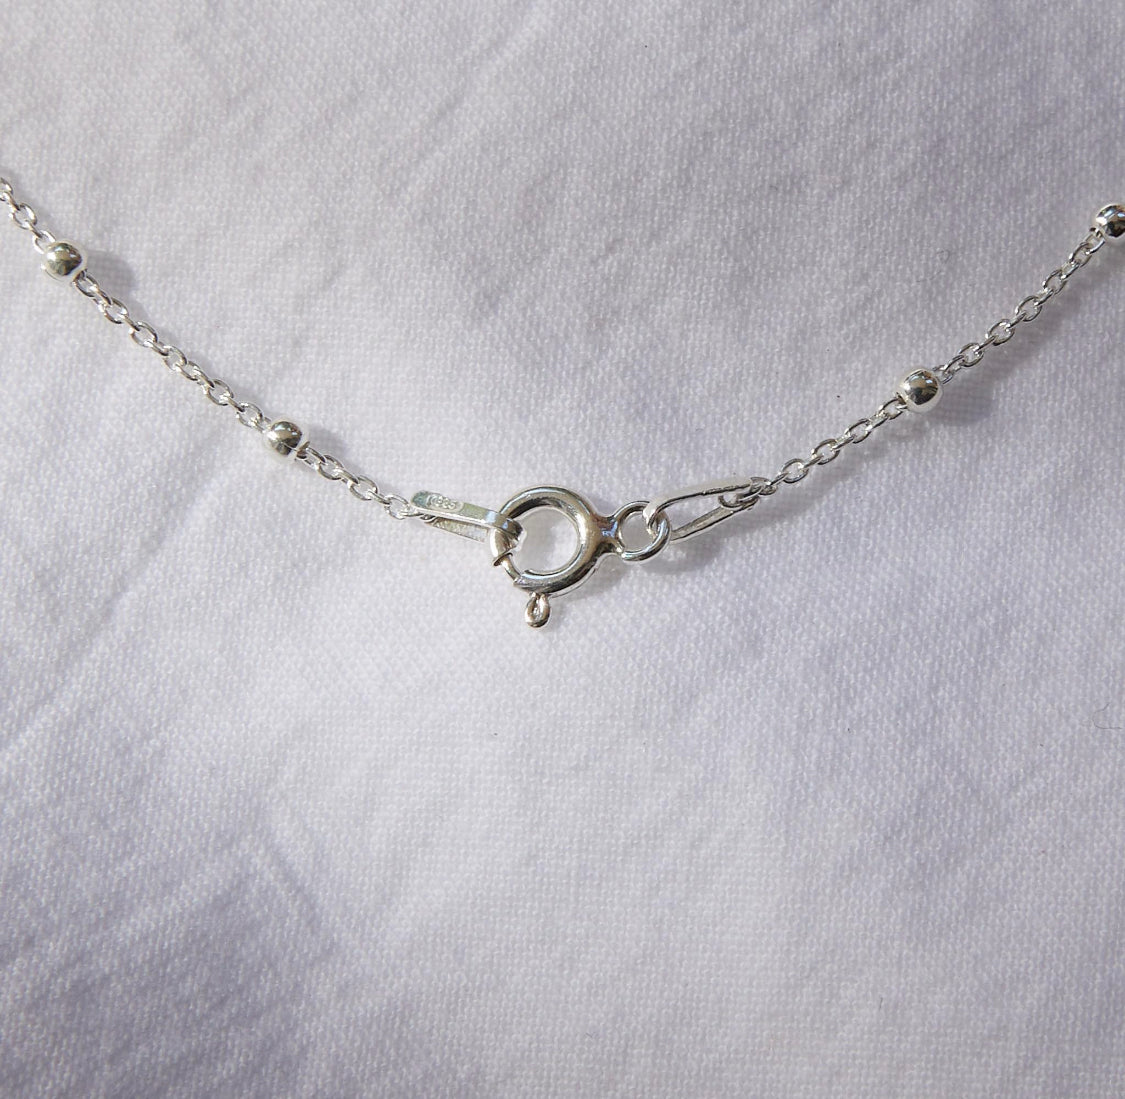 11:11 pendant on Sterling Silver ball chain